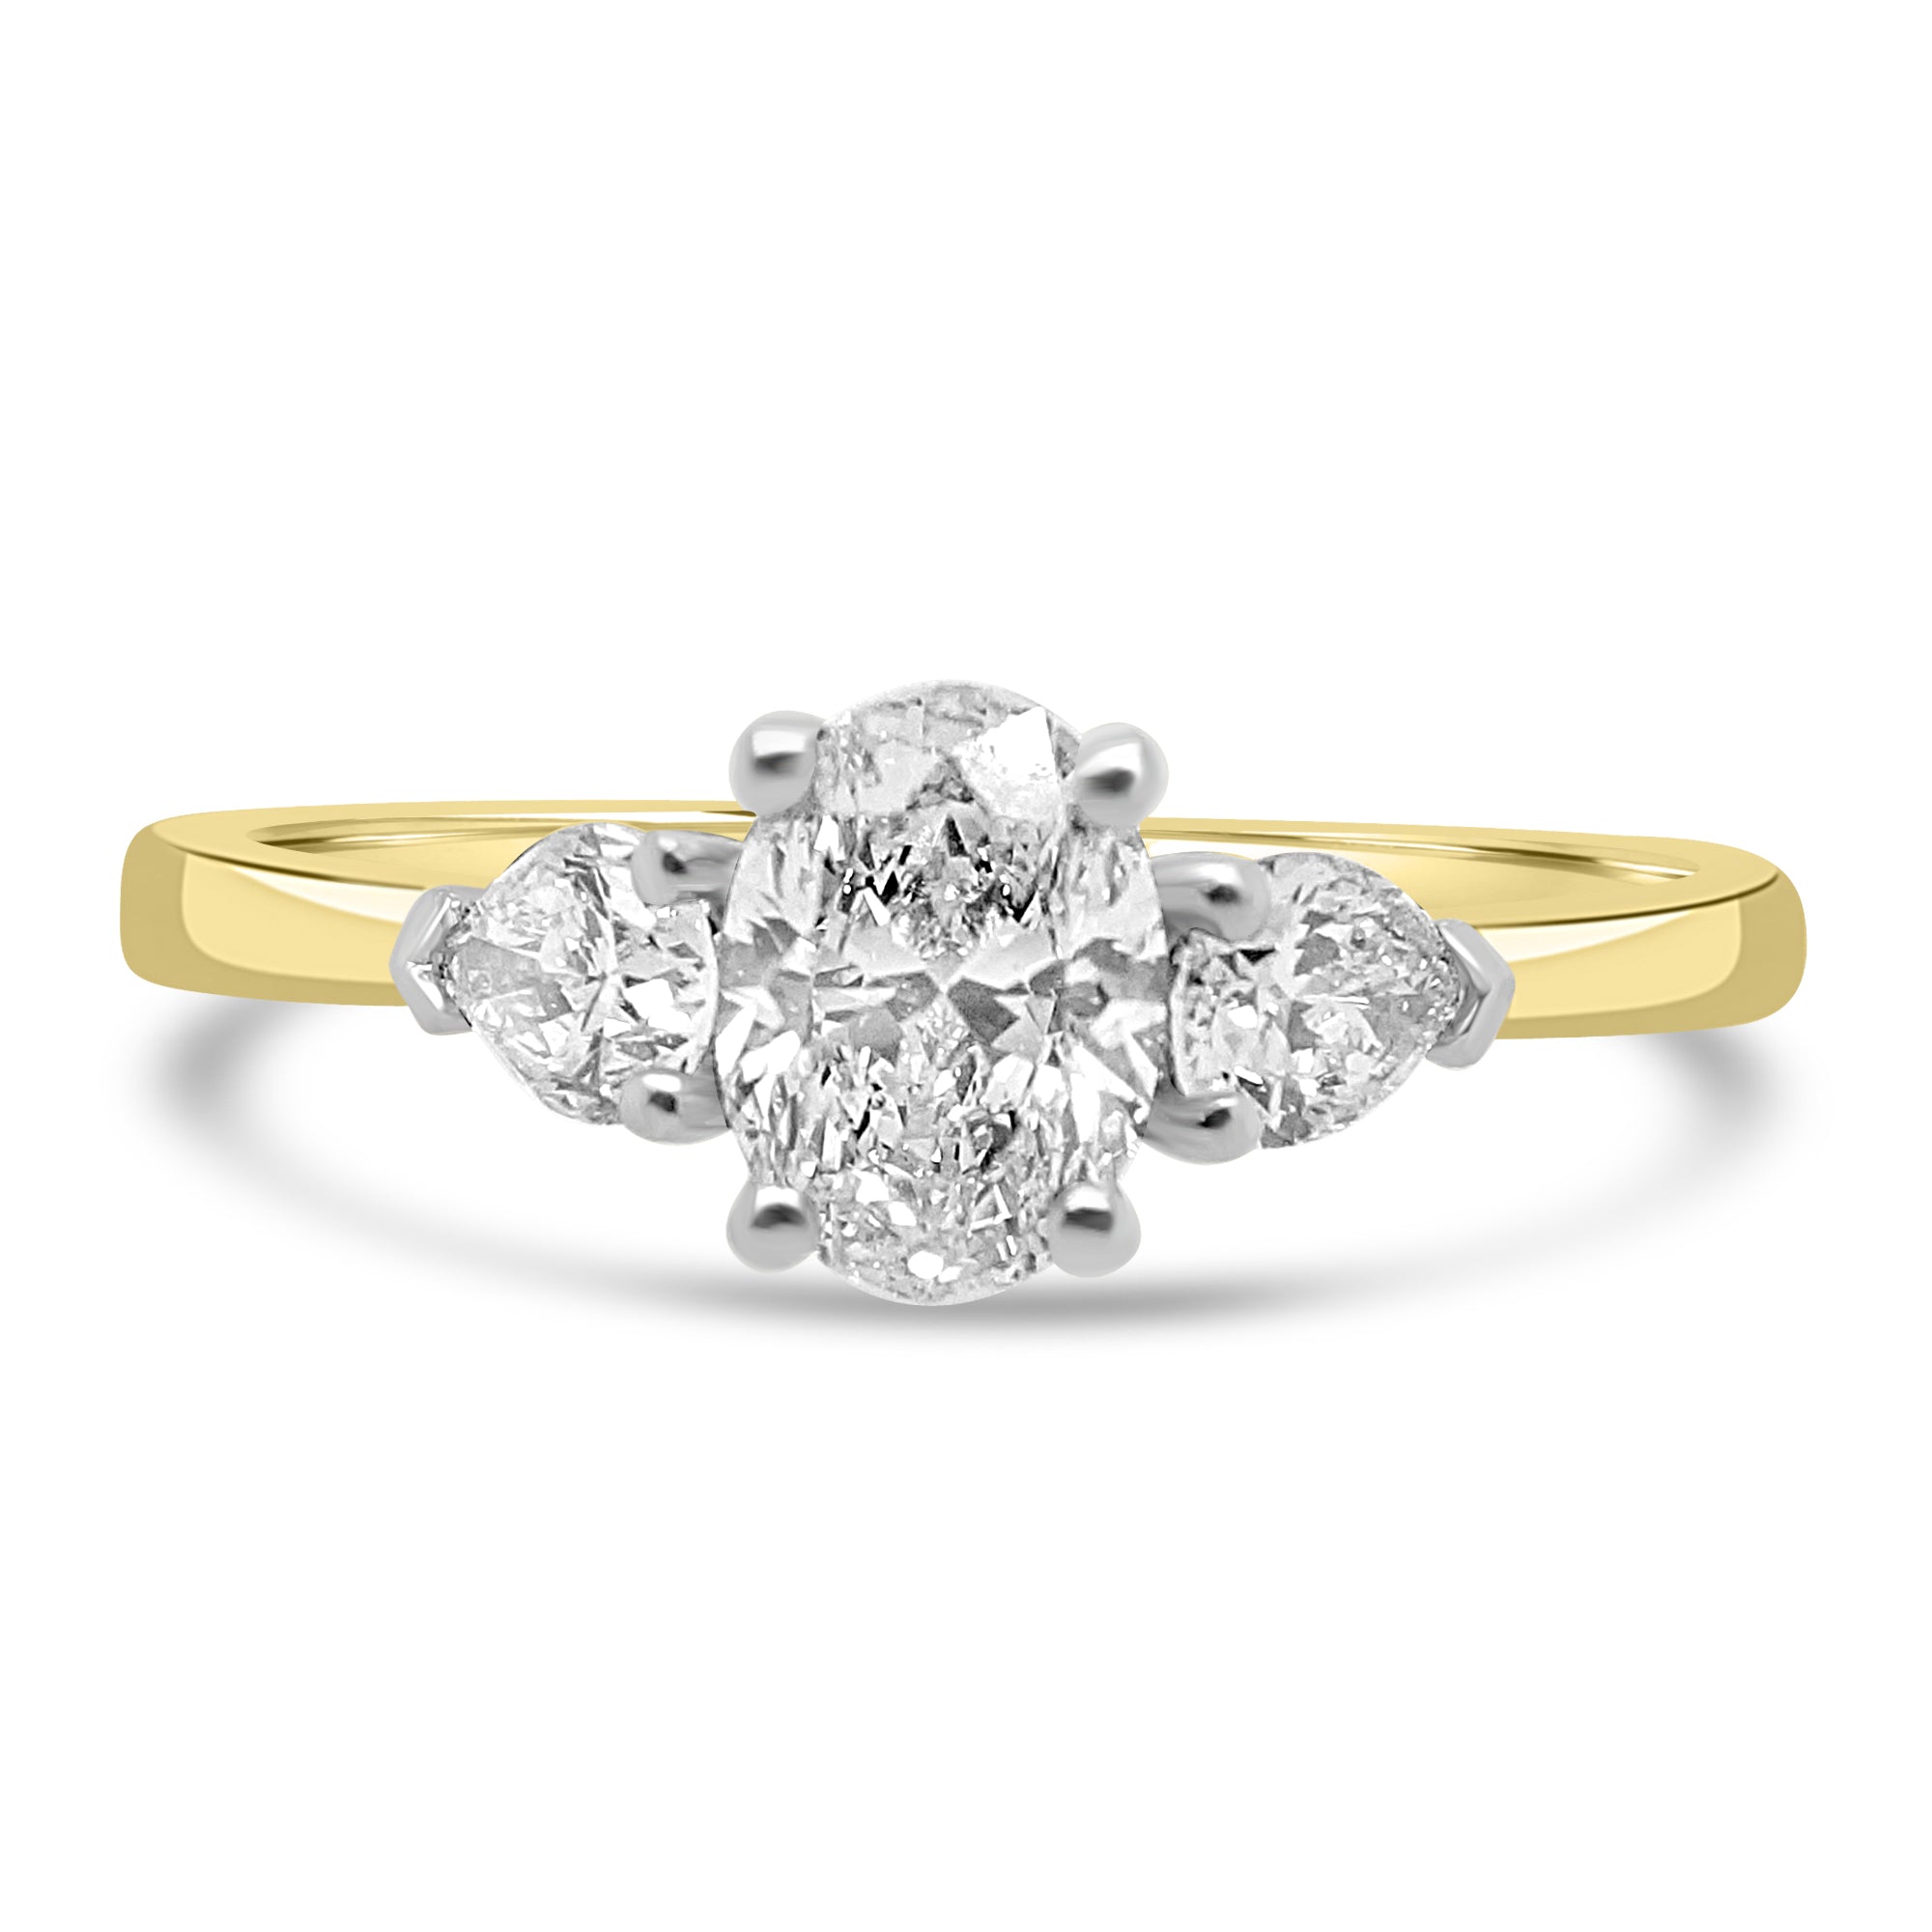 OVAL CUT DIAMOND TRILOGY ENGAGEMENT RING